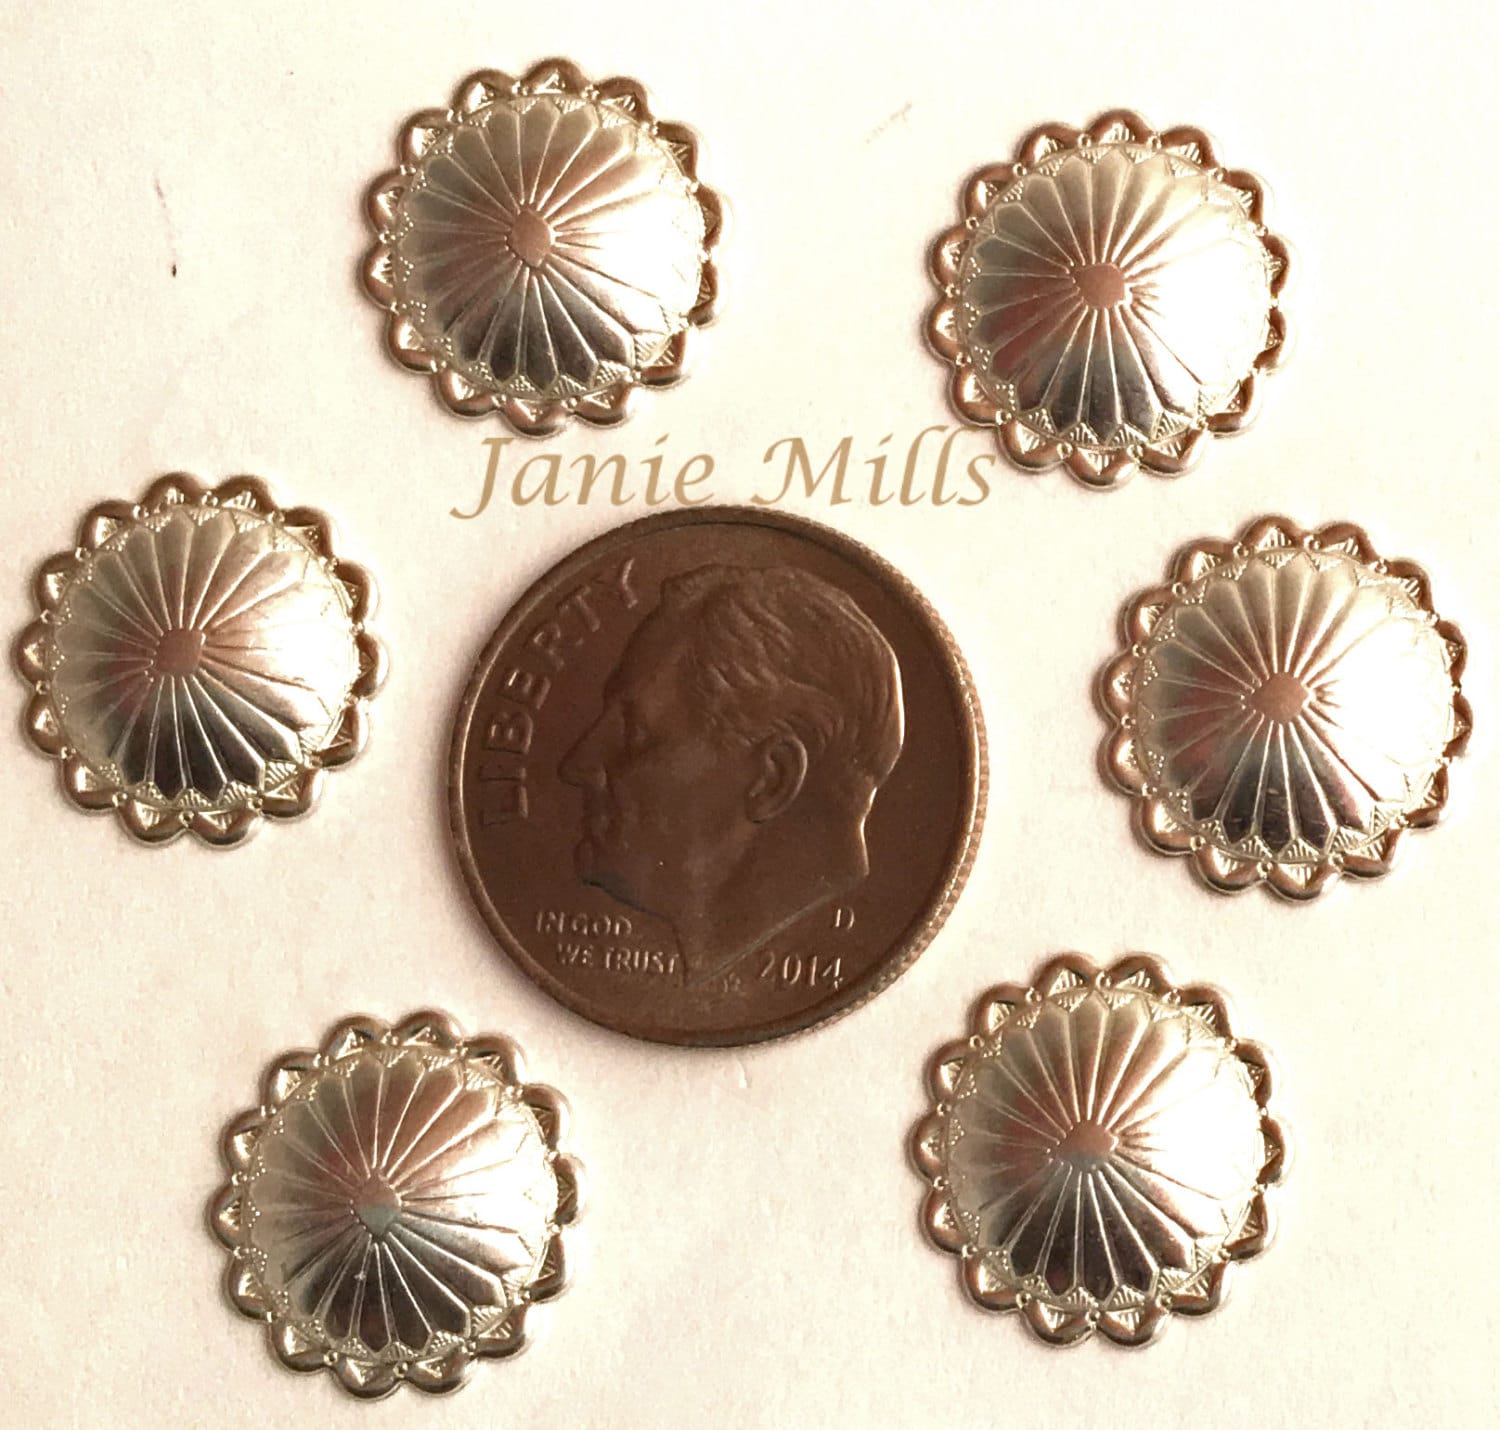 Sterling Silver Round Concho Disk 3/4 Set of 6 0054